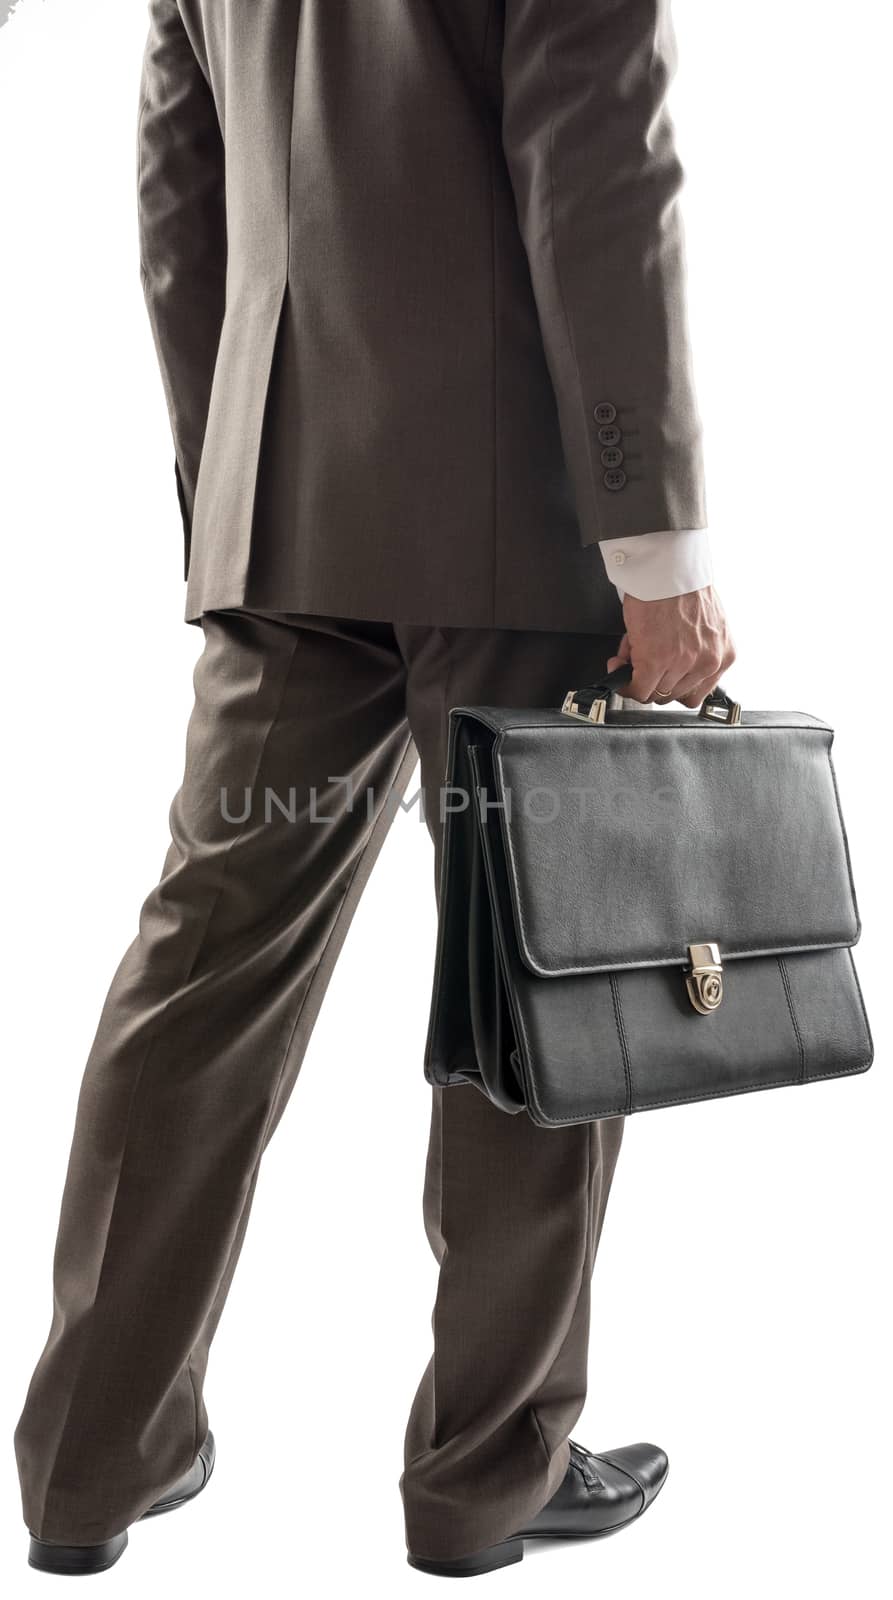 Back view of businessman with suitcase in hand, close up view